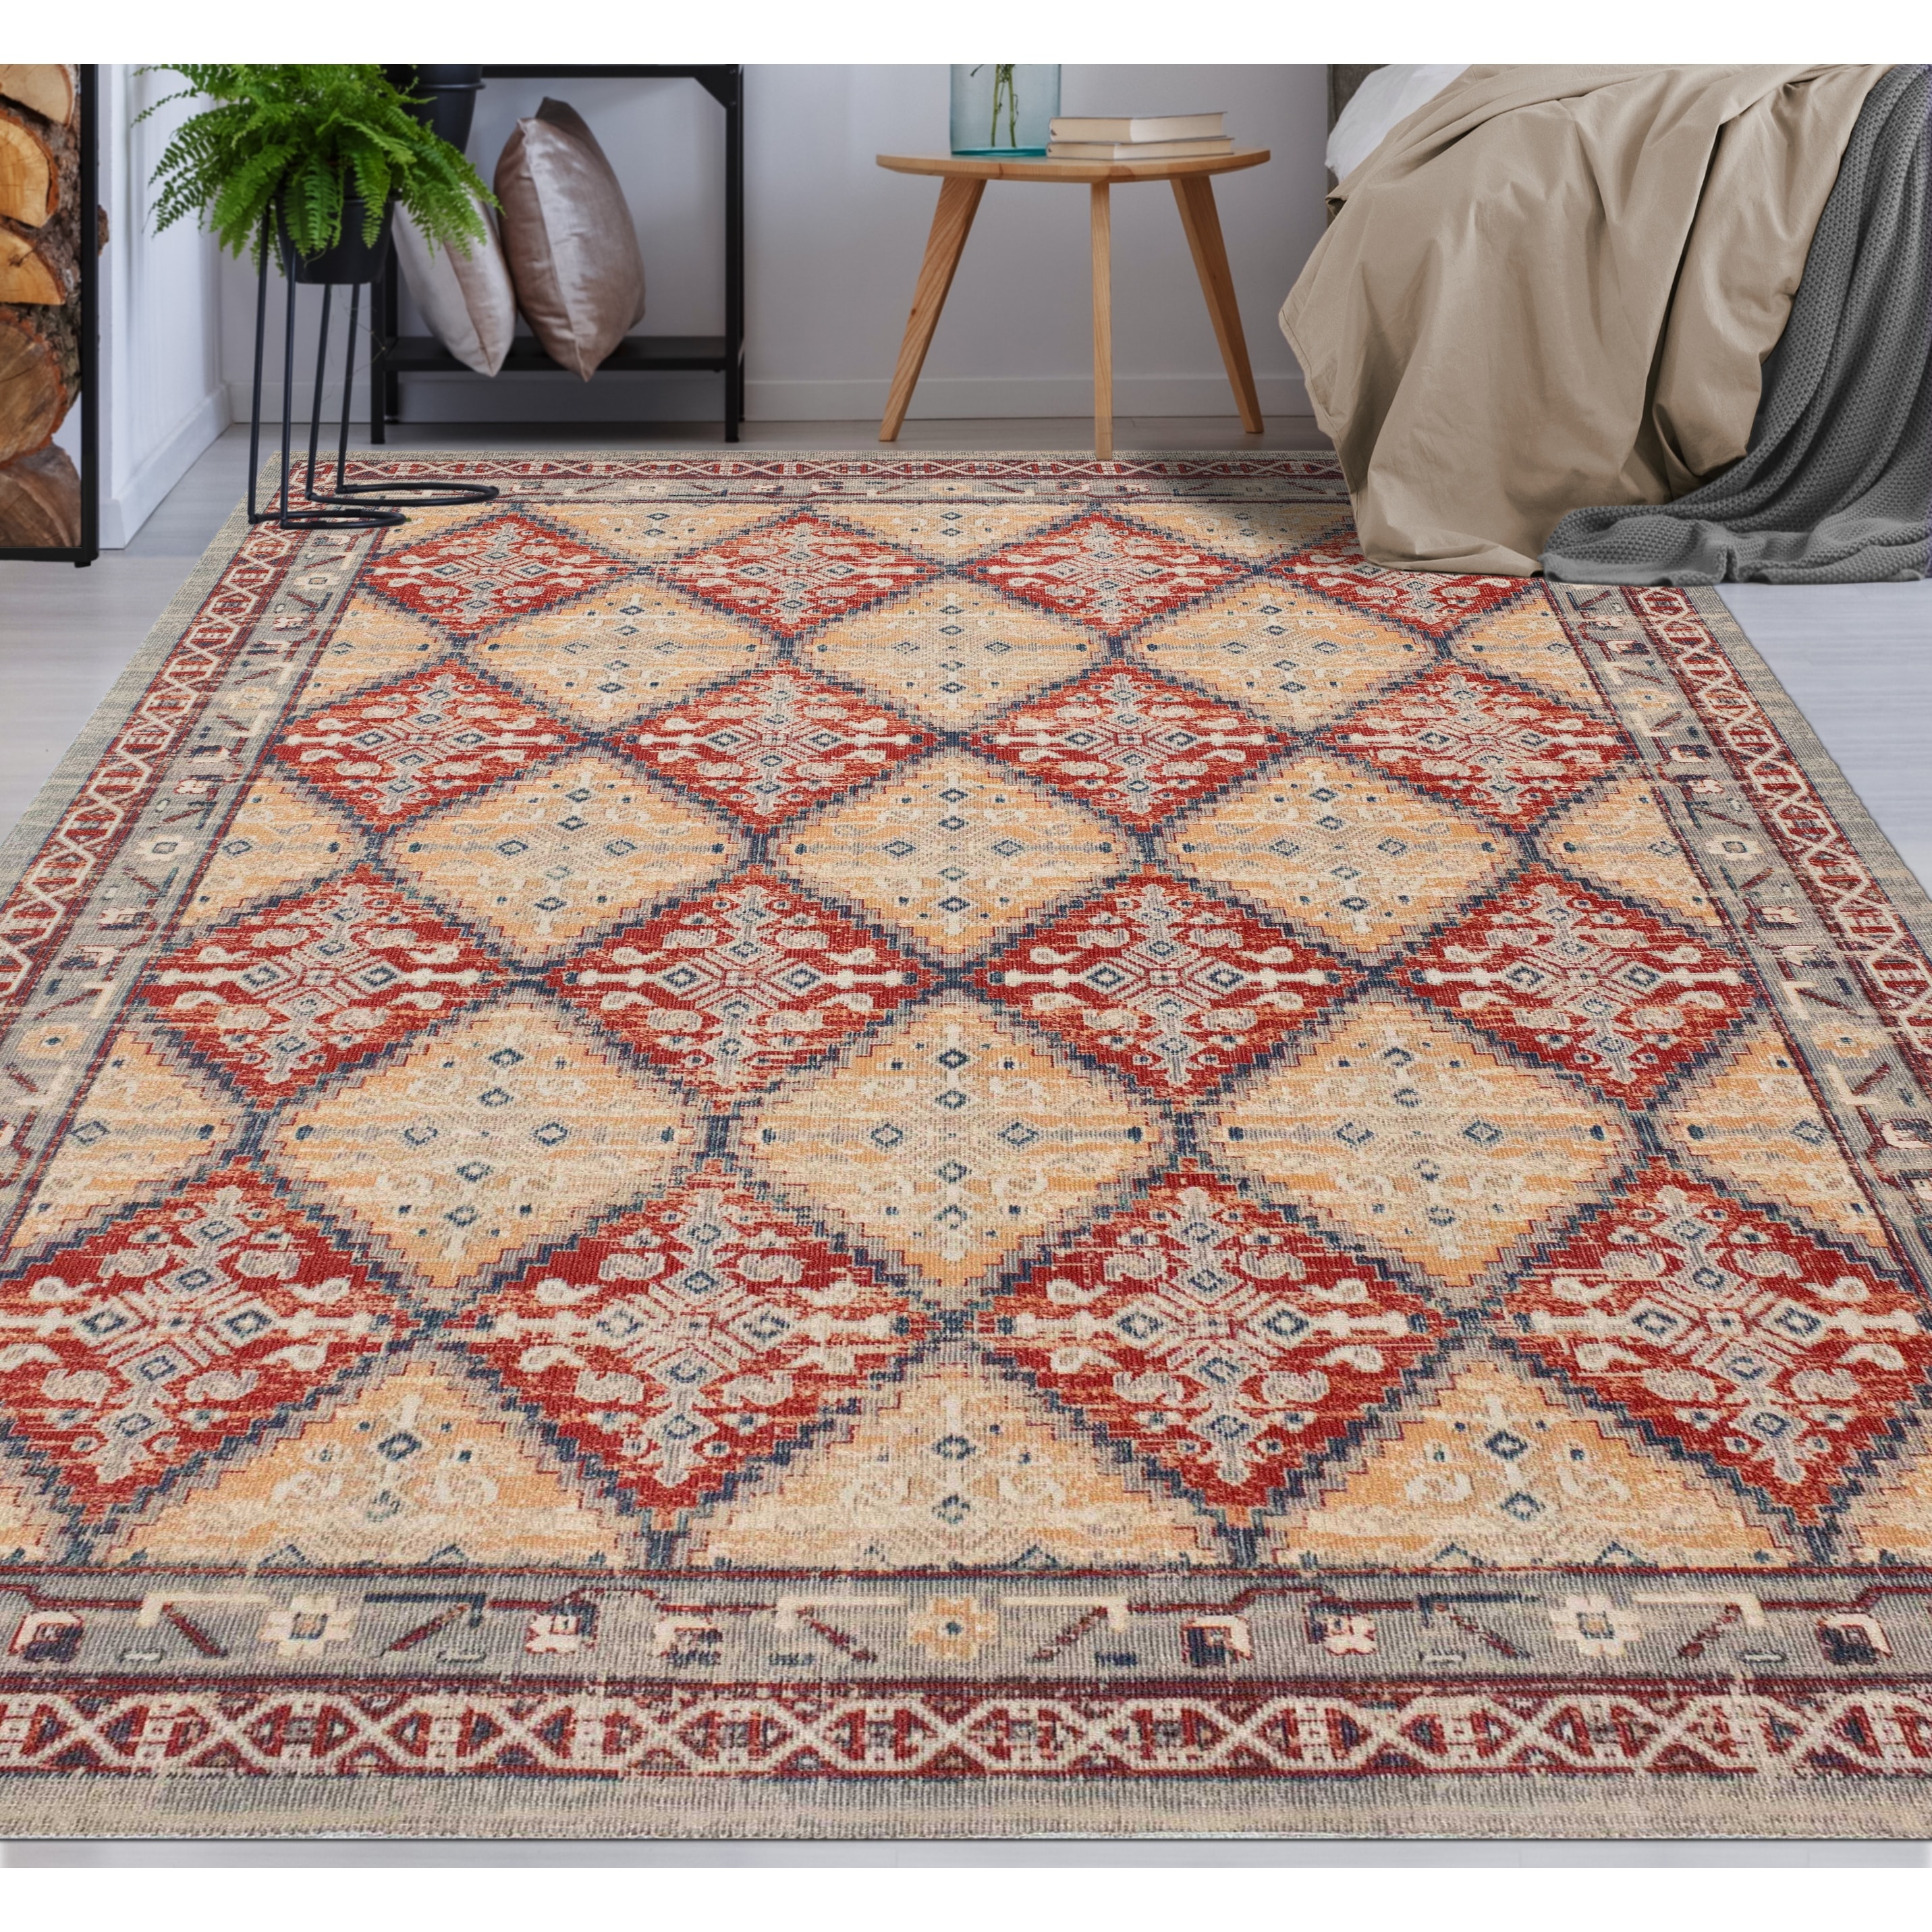 https://ak1.ostkcdn.com/images/products/is/images/direct/b12782f721234b2519664d643e7b7a6b19389dc7/Noori-Rug-Rivaj-Low-Pile-Jerald-Rug.jpg